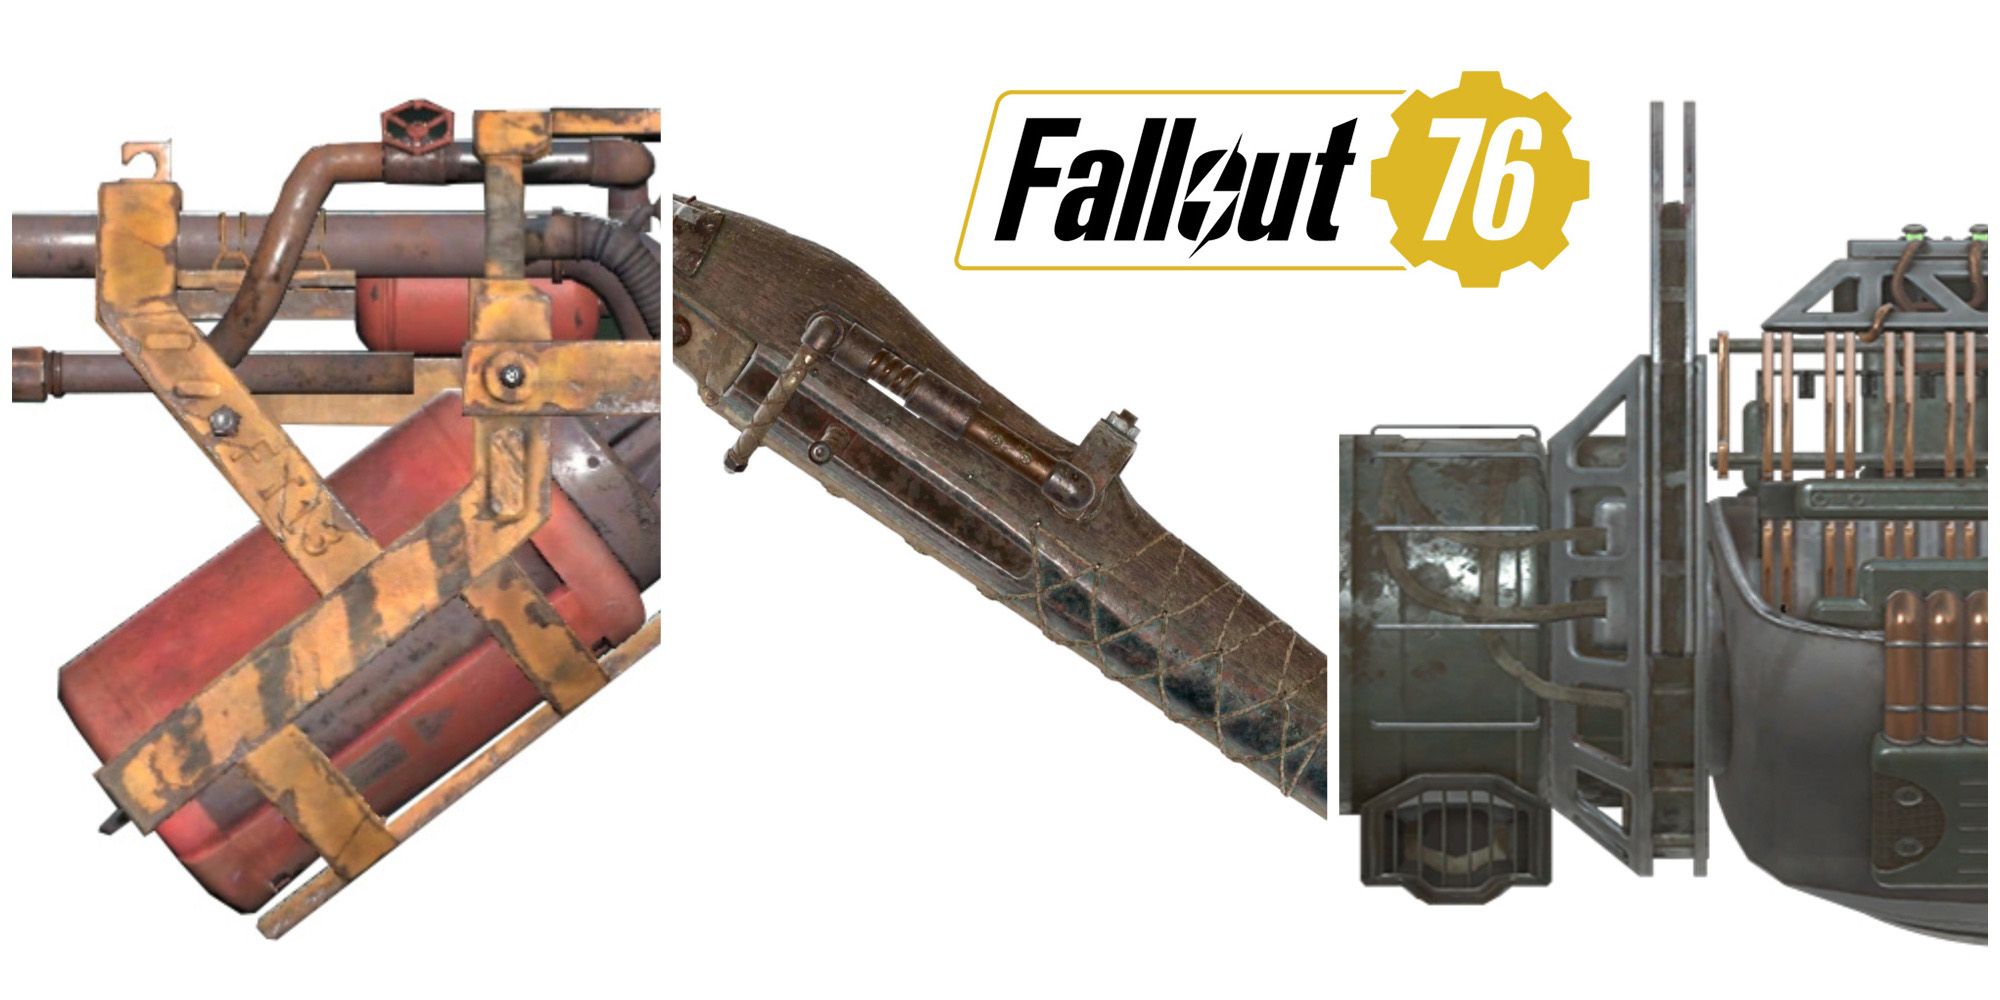 Fallout 76 Heavy Guns featured image